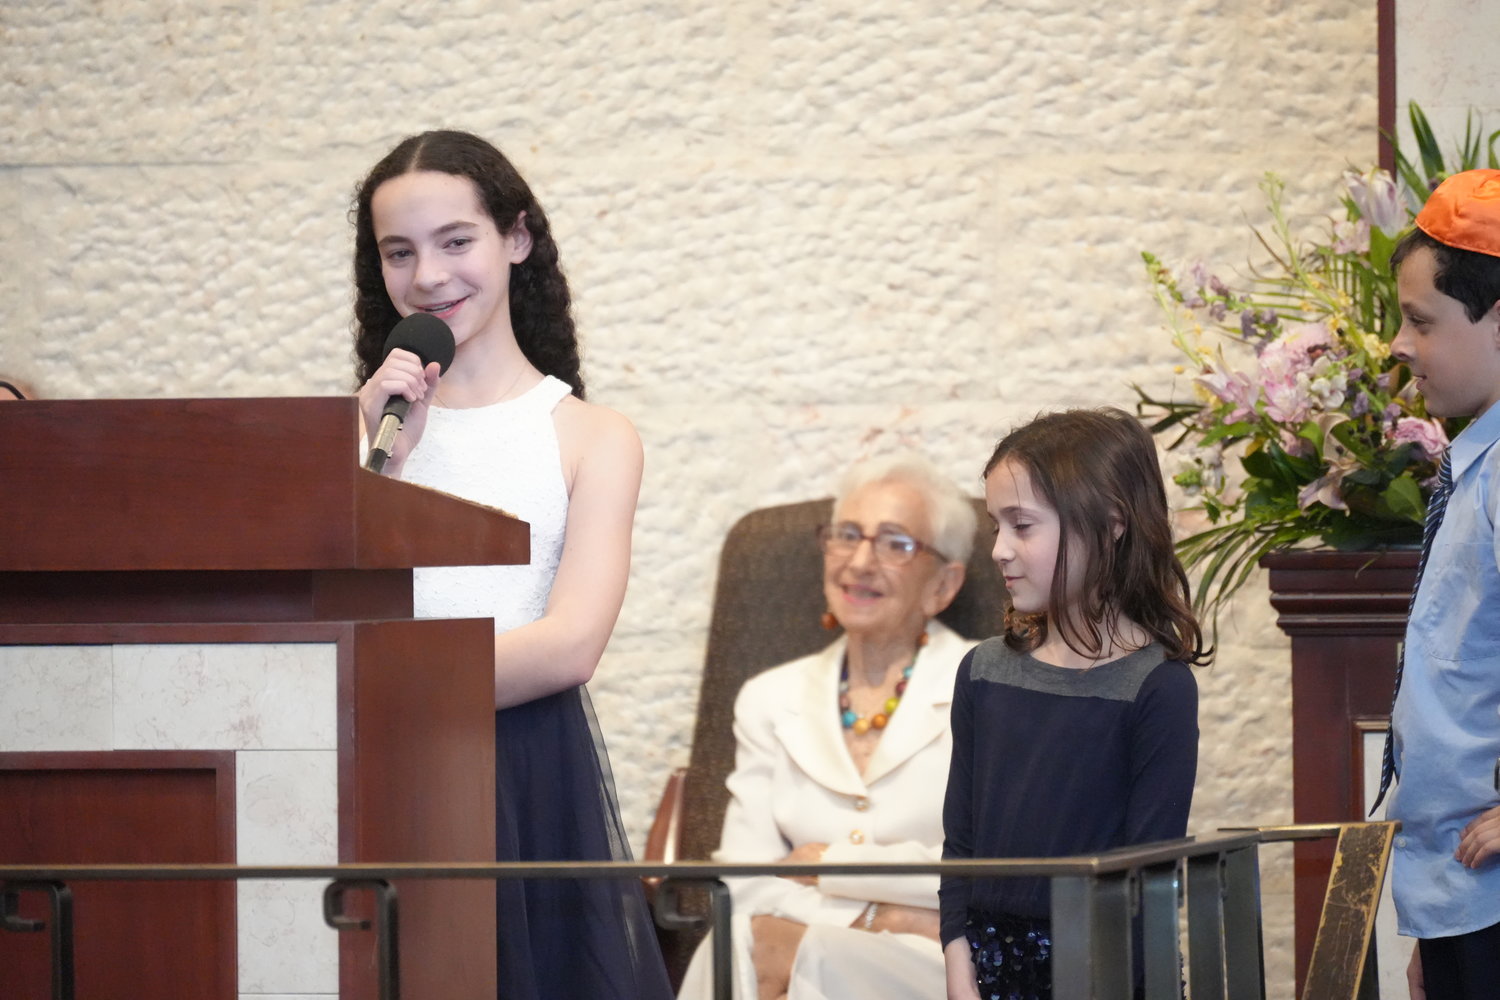 Sara Androphy, the rabbi’s granddaughter, along with her siblings and cousins, shared some of her favorite things to do with her savta, grandmother, and zaydie, grandfather.